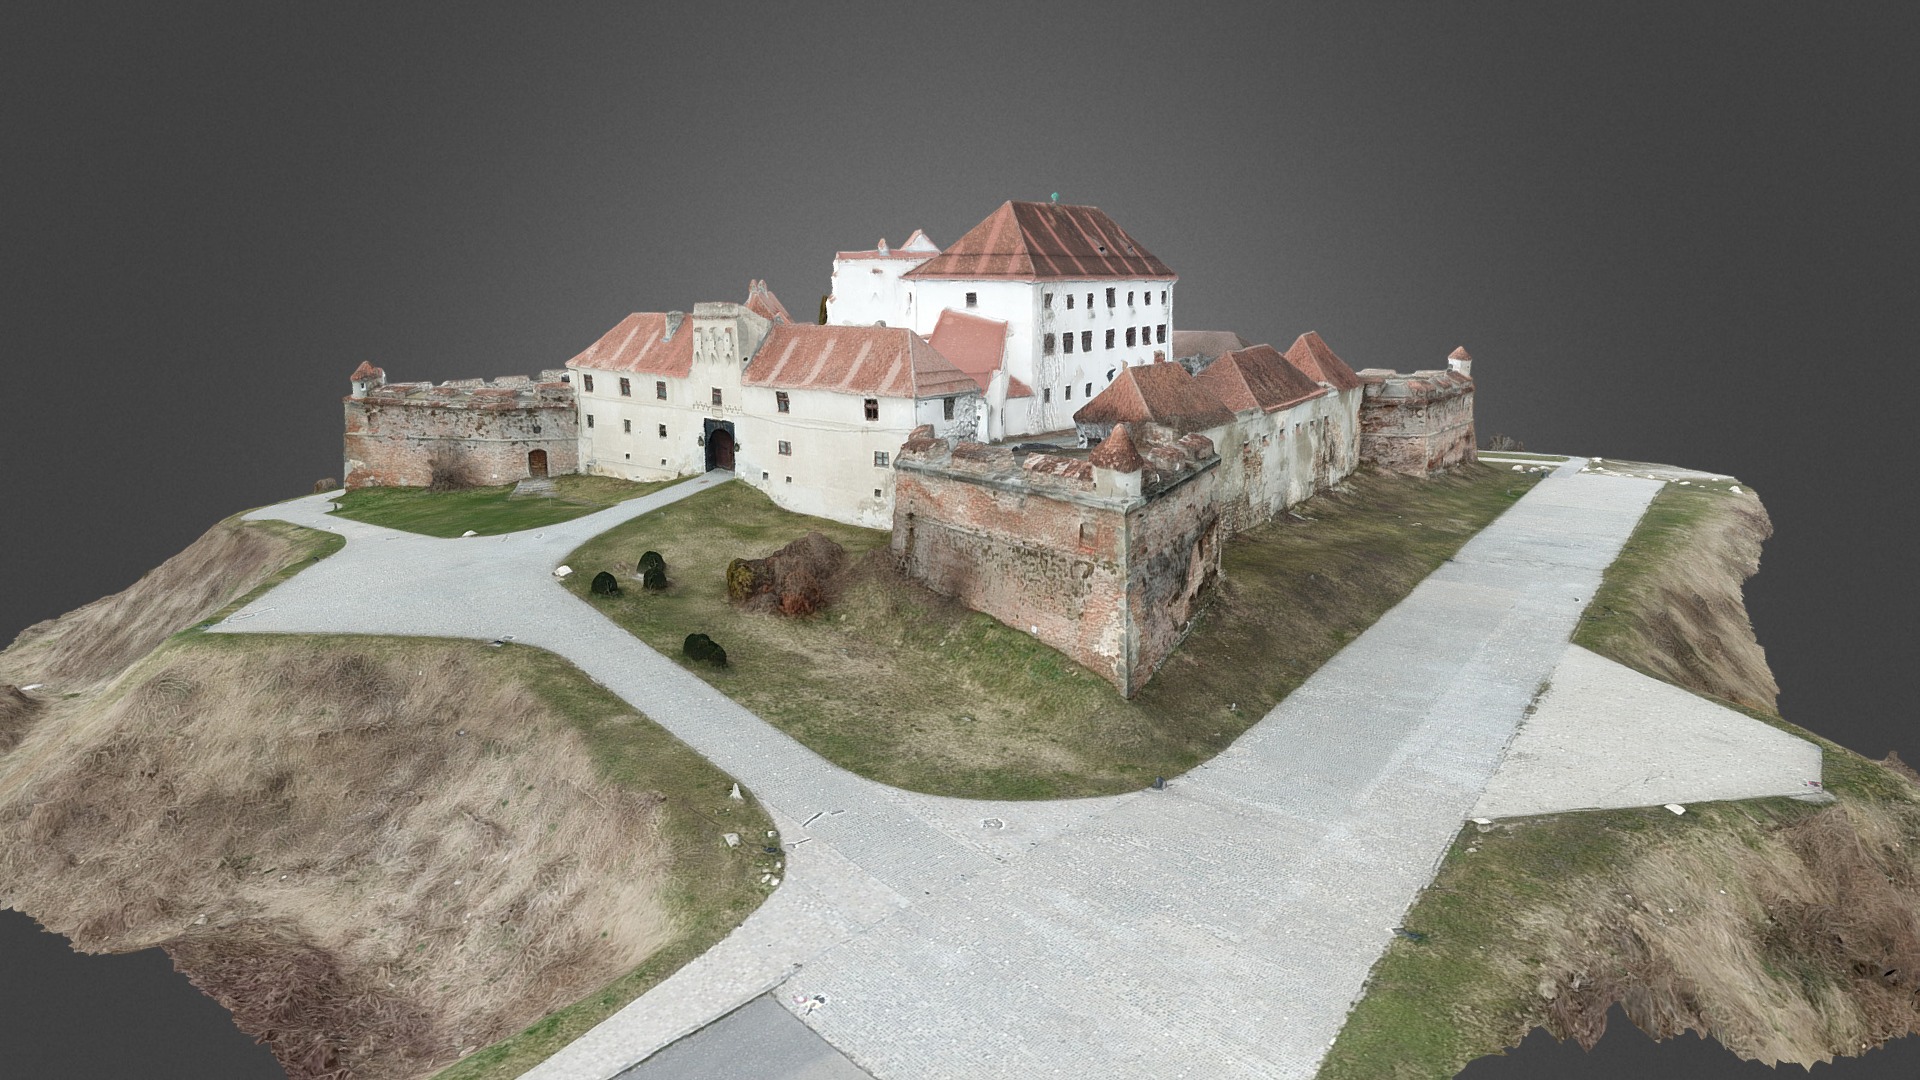 3D model Brasov fortress 3D model - This is a 3D model of the Brasov fortress 3D model. The 3D model is about a white building on a hill.